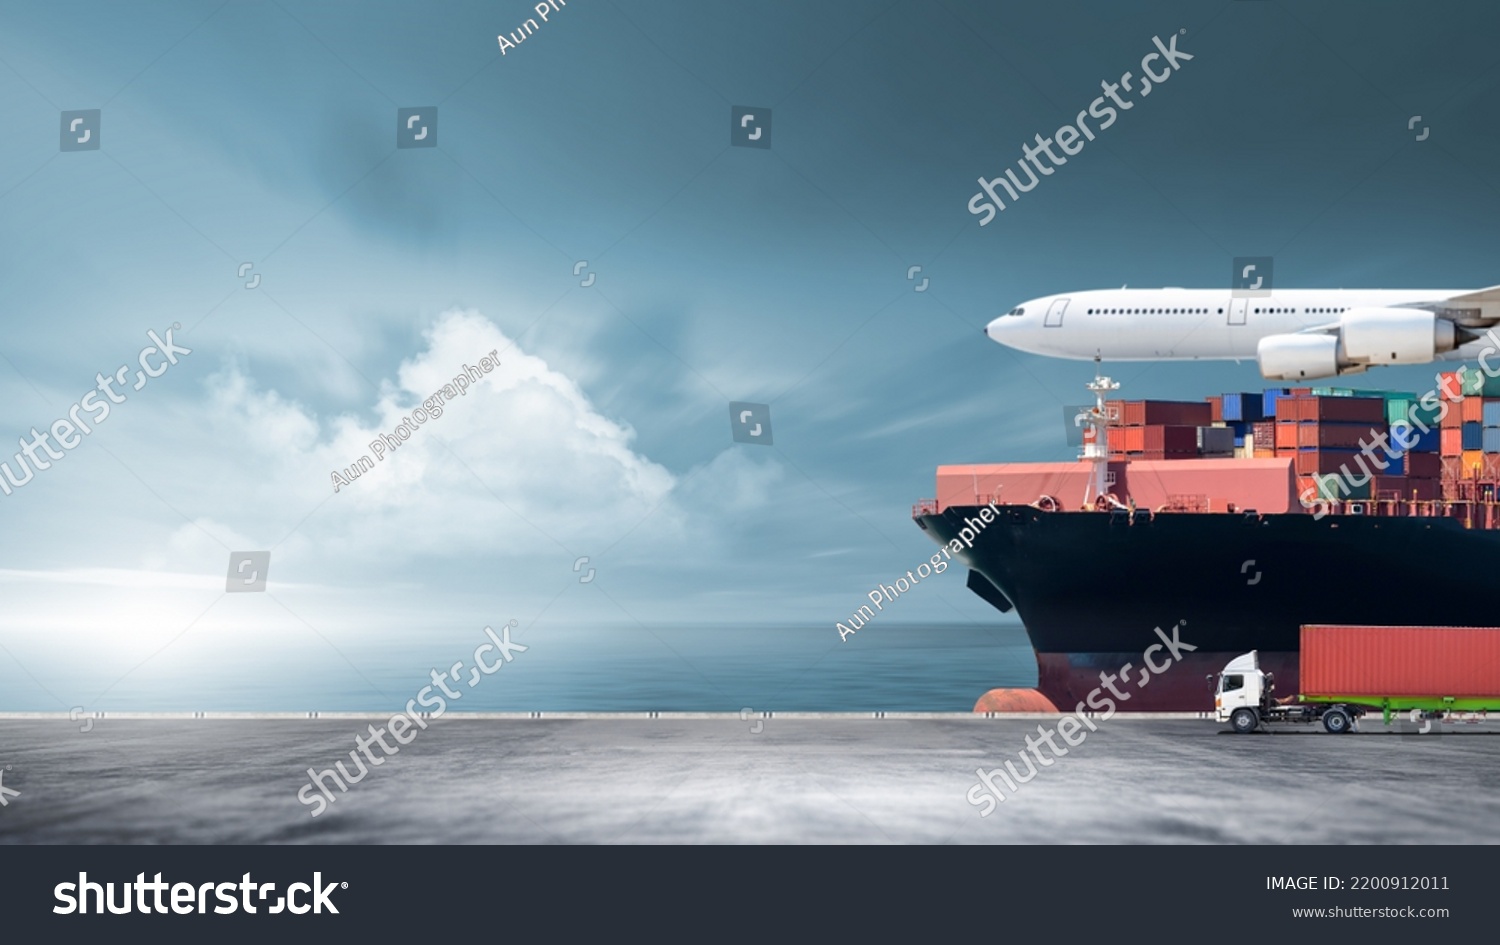 Containers cargo logistics import export transport concept, Big ship in the ocean, Container truck and plane at sunset dramatic sky background with copy space, Nautical vessel and sea freight shipping #2200912011